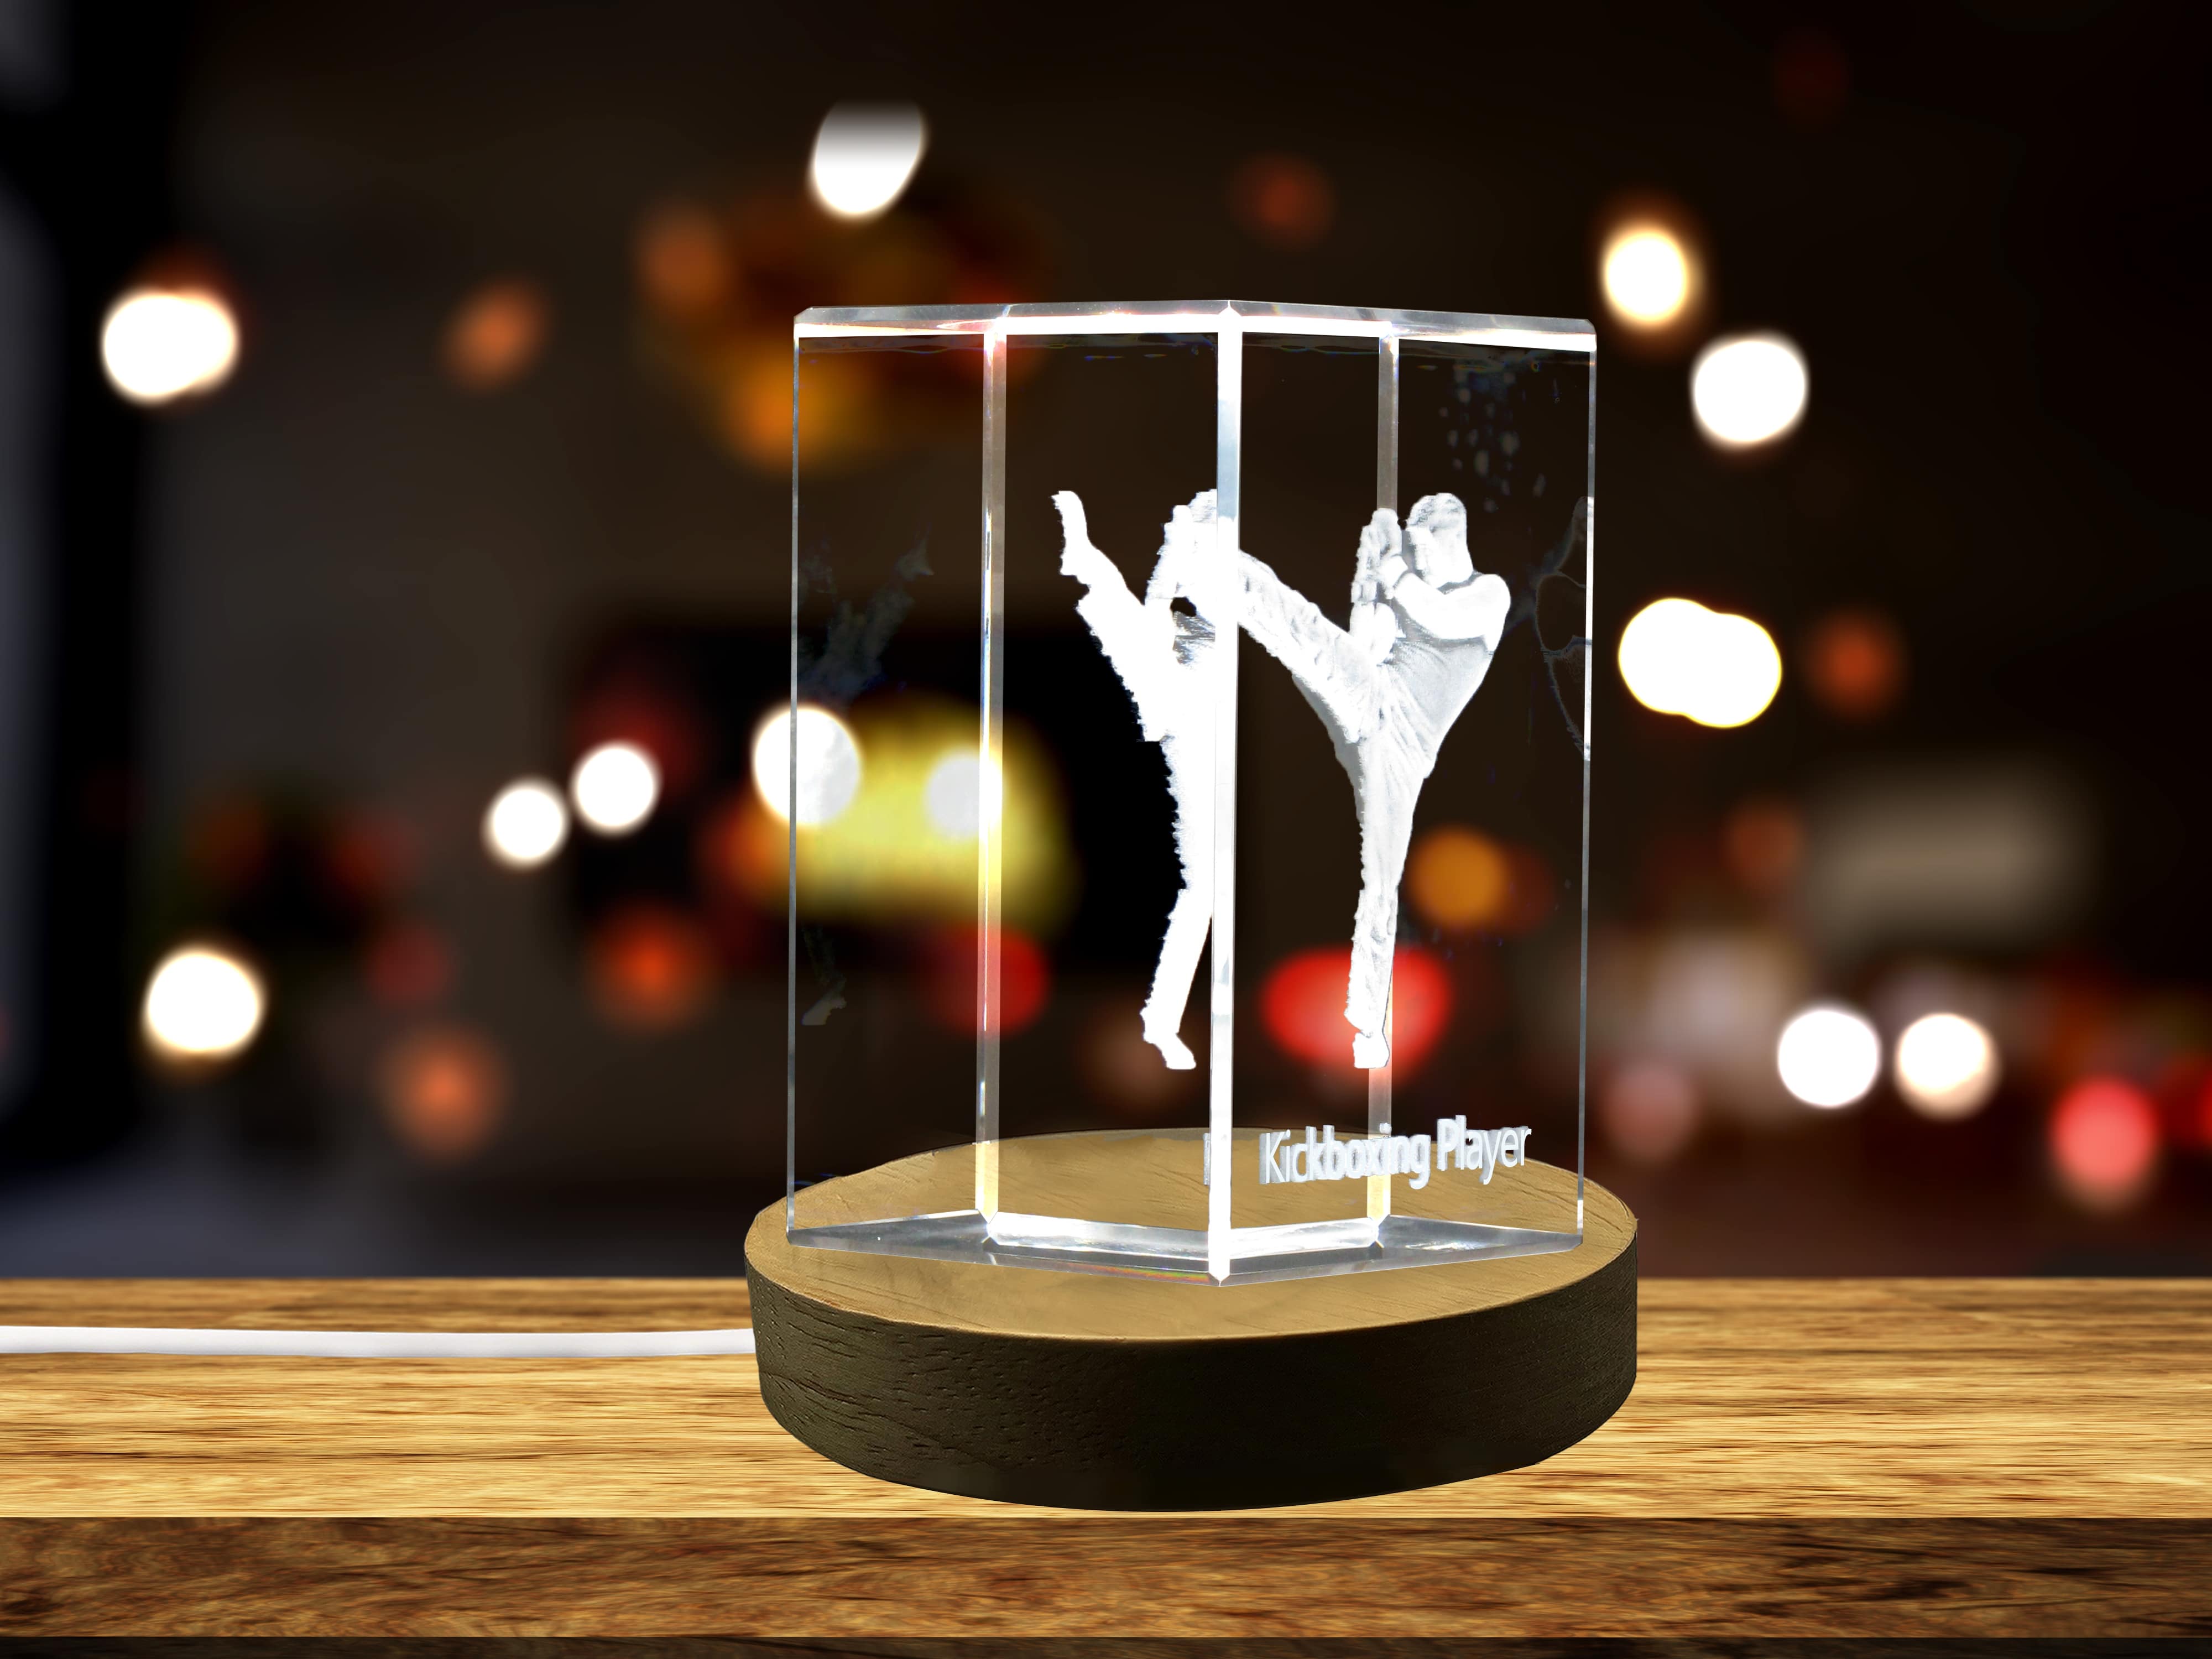 Kickboxing Player 3D Engraved Crystal 3D Engraved Crystal Keepsake/Gift/Decor/Collectible/Souvenir A&B Crystal Collection